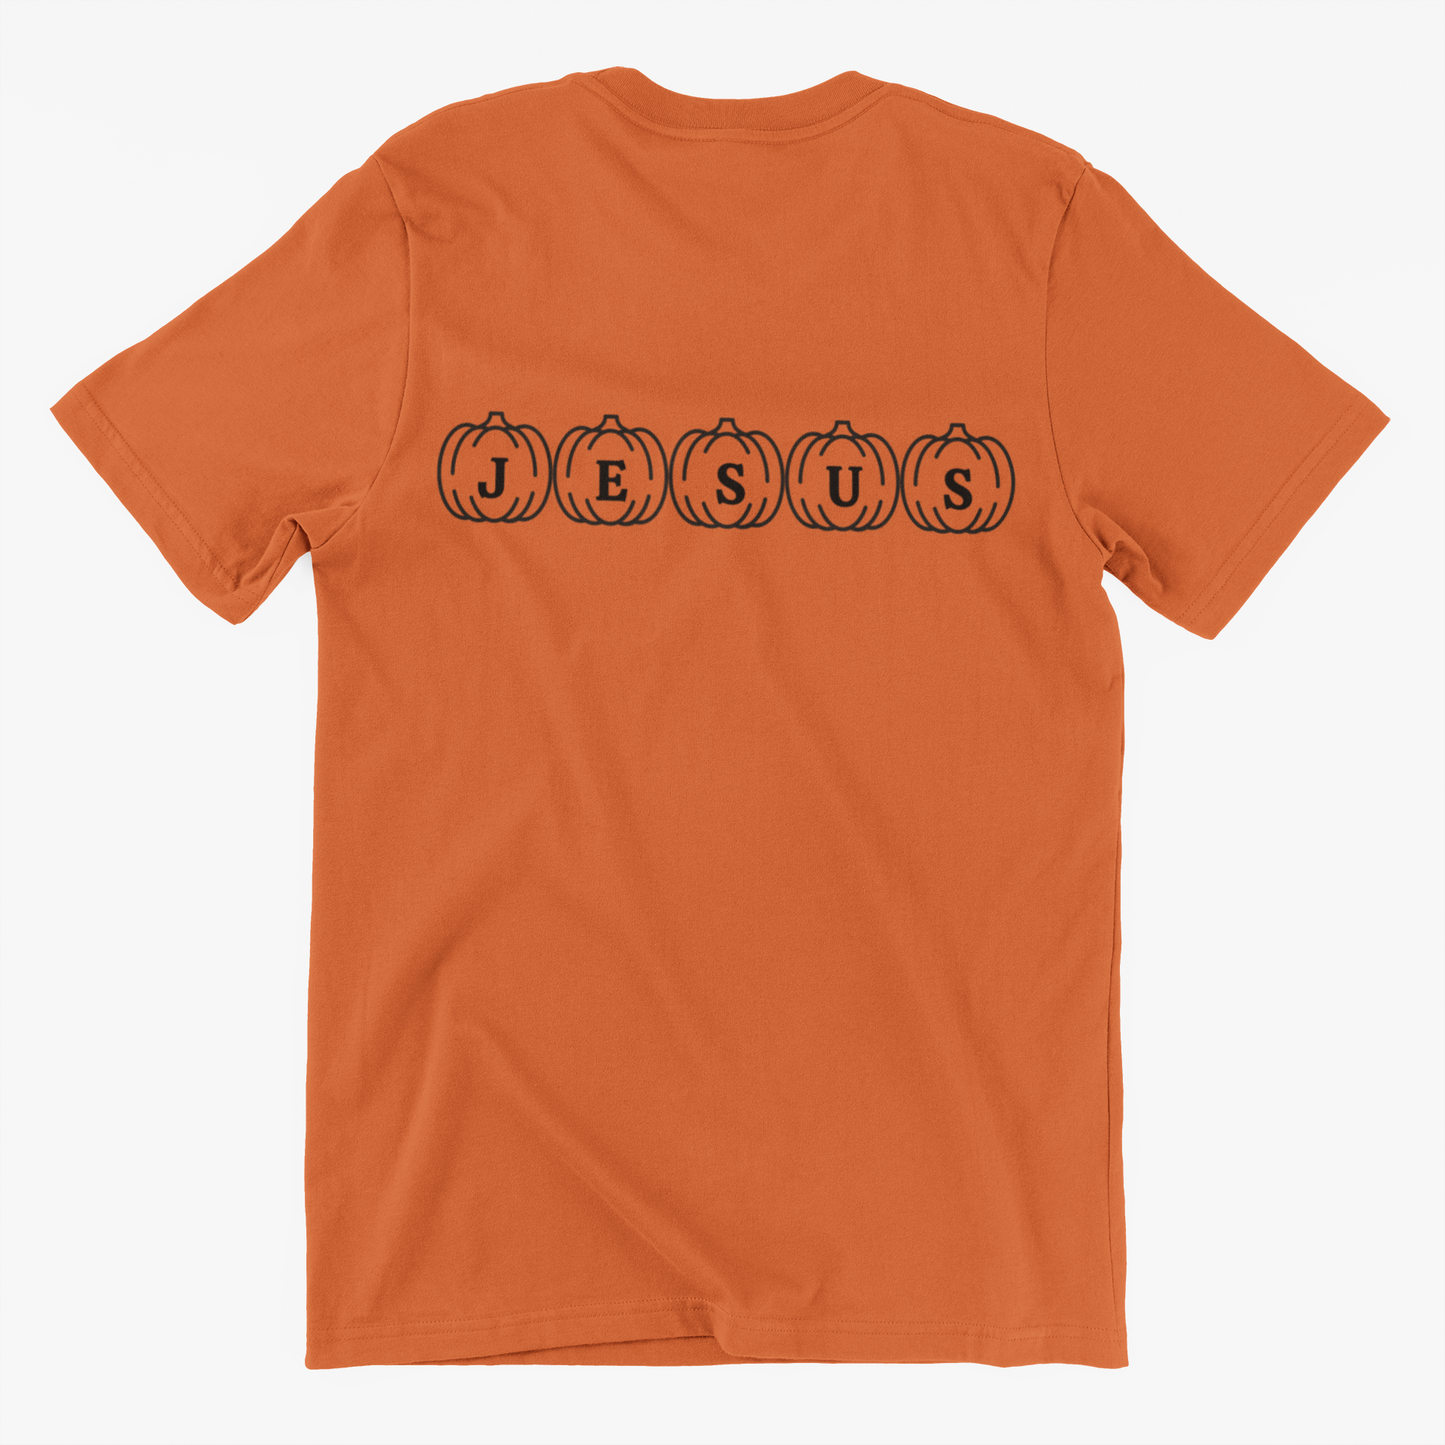 Jesus on pumpkins graphic t-shirt for fall